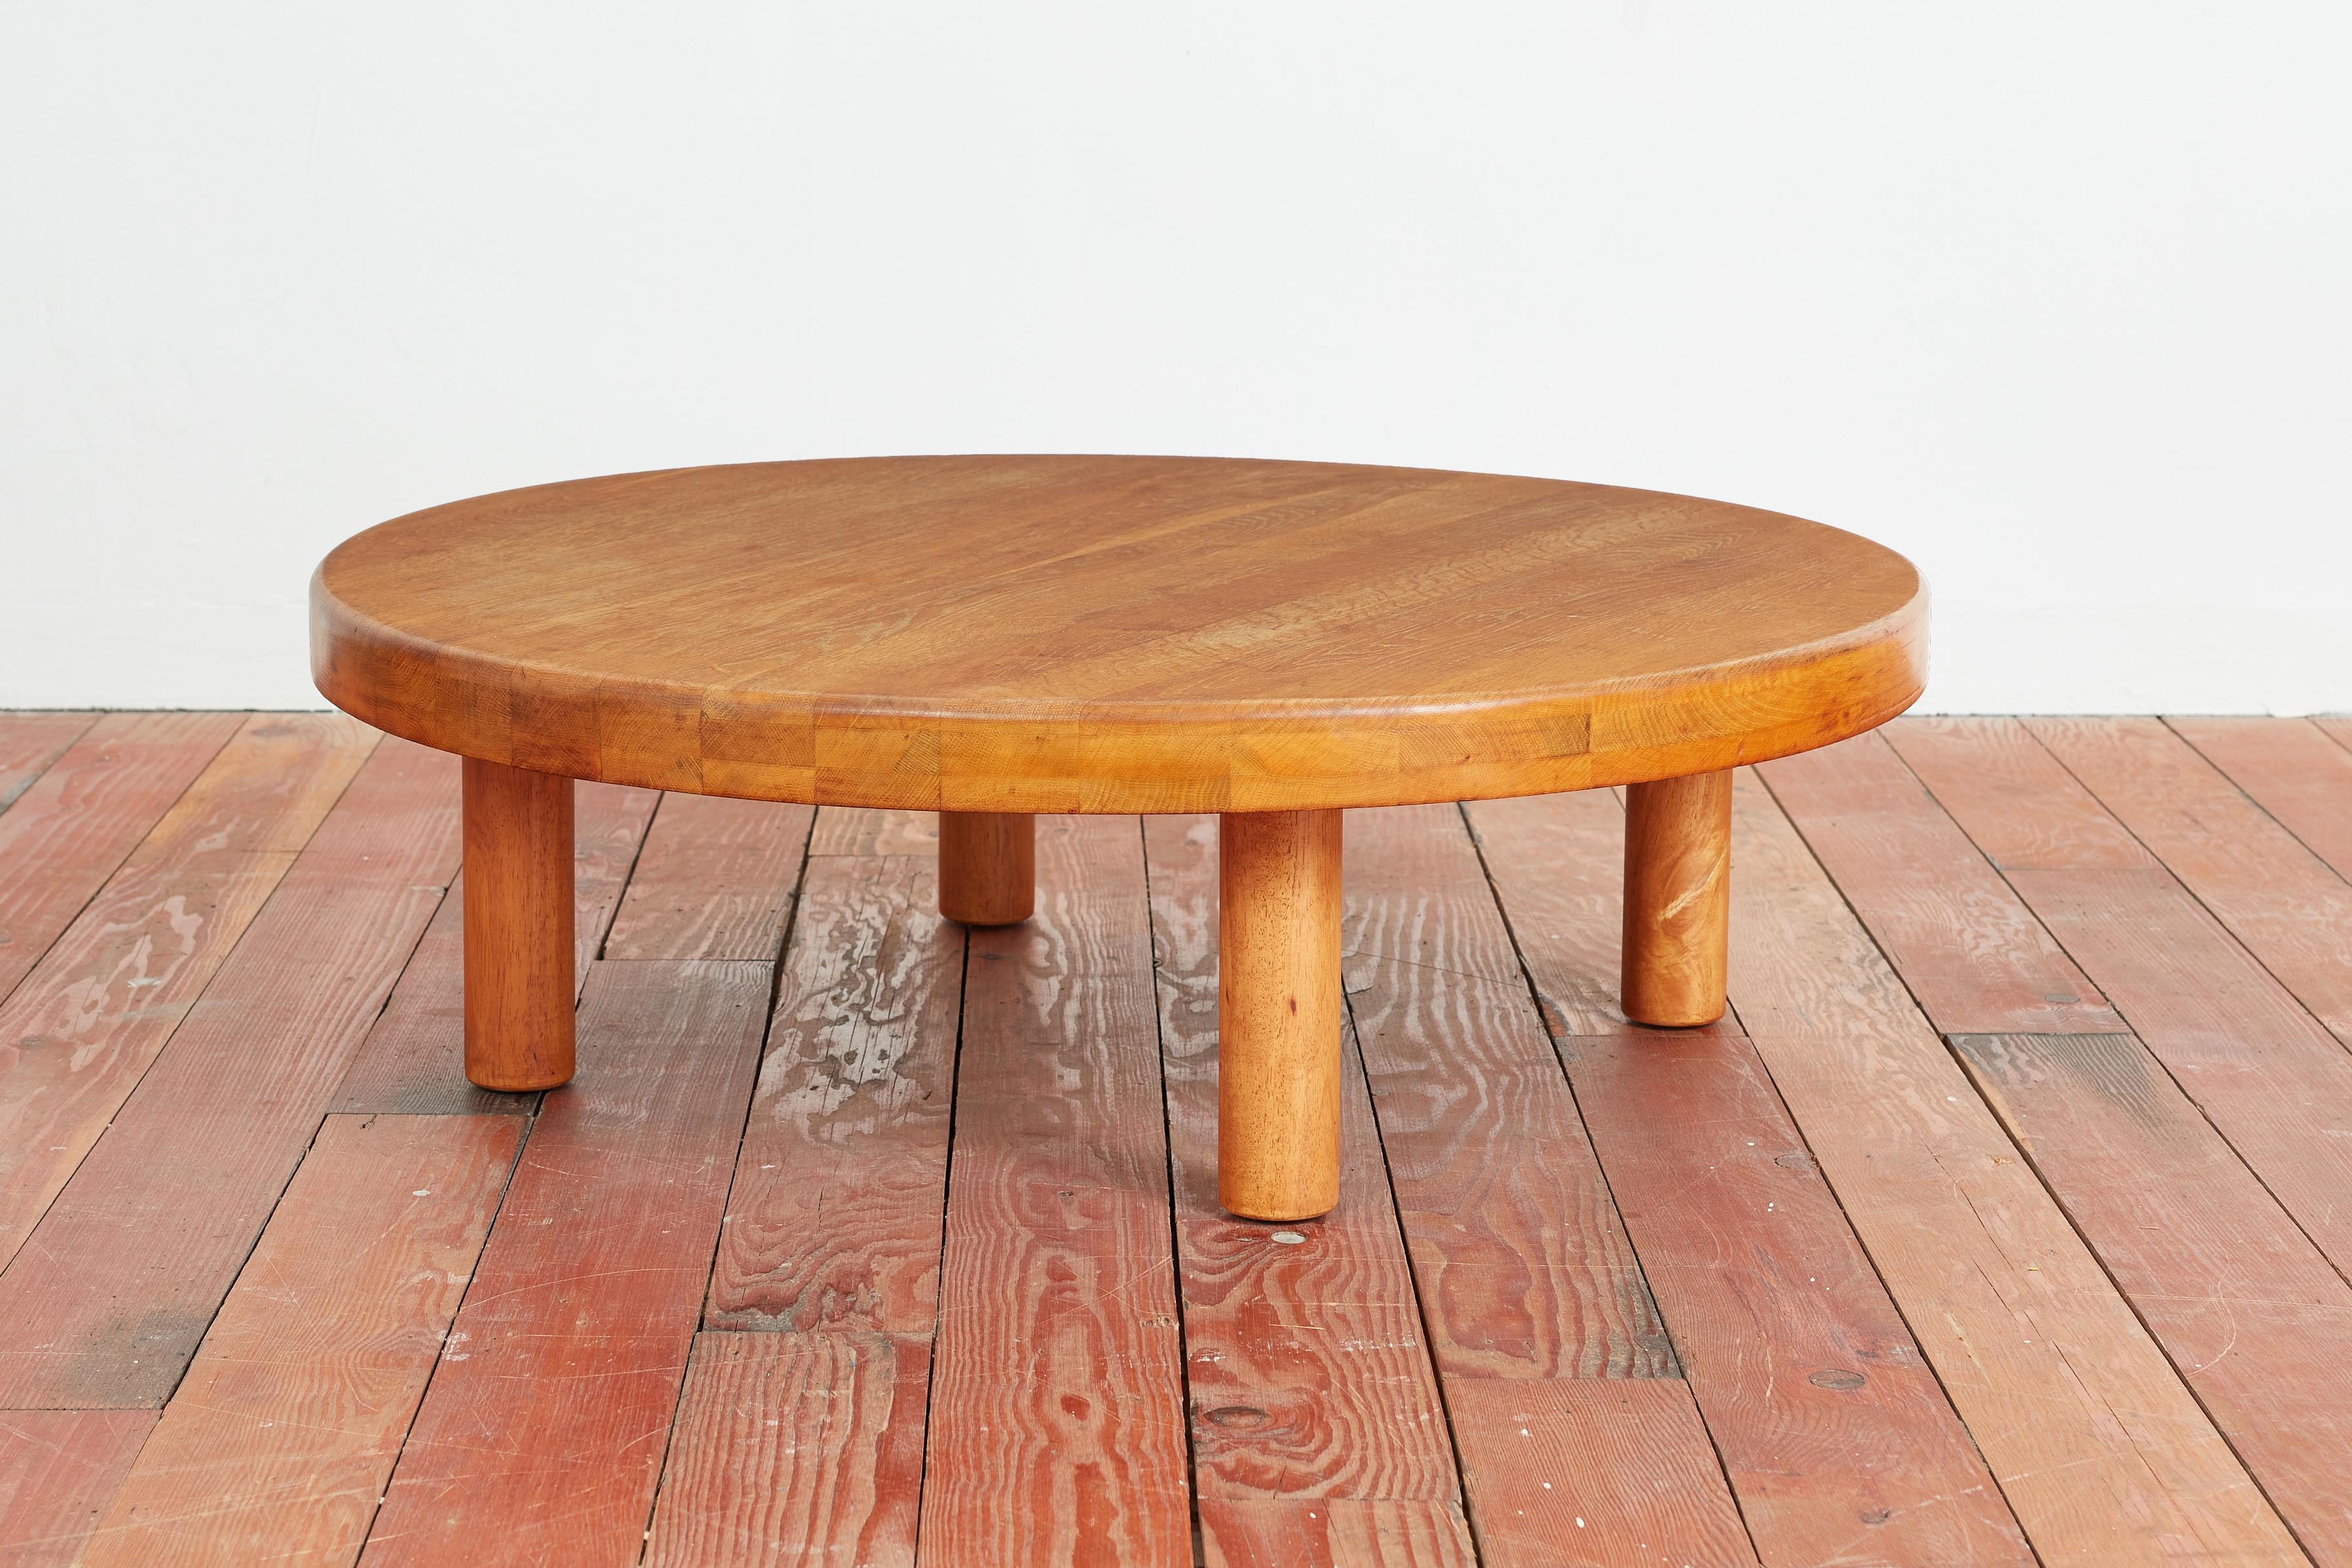 French round oak coffee table with all the right patina

Thick oak top with simple cylinder legs 

France, 1950's 